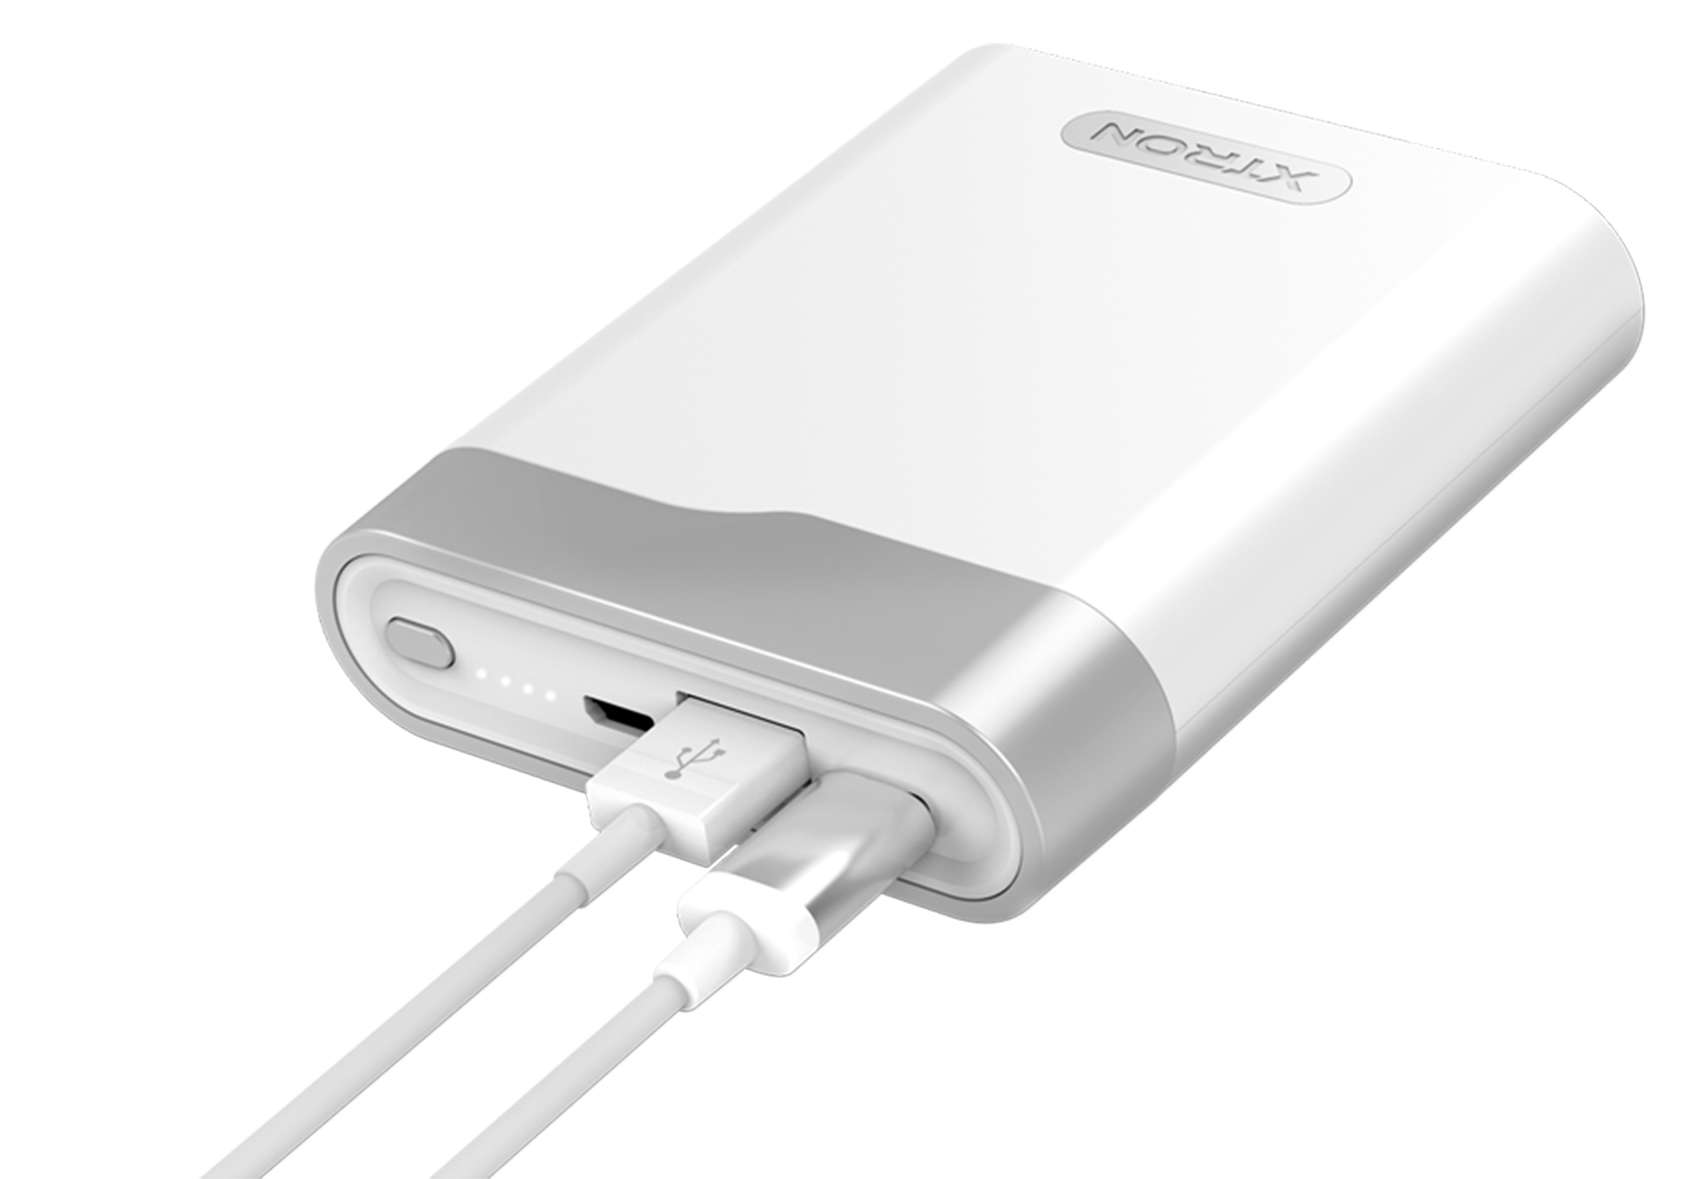 The XTRON from Maximas has a USB-C port and is capable of charging multiple devices.